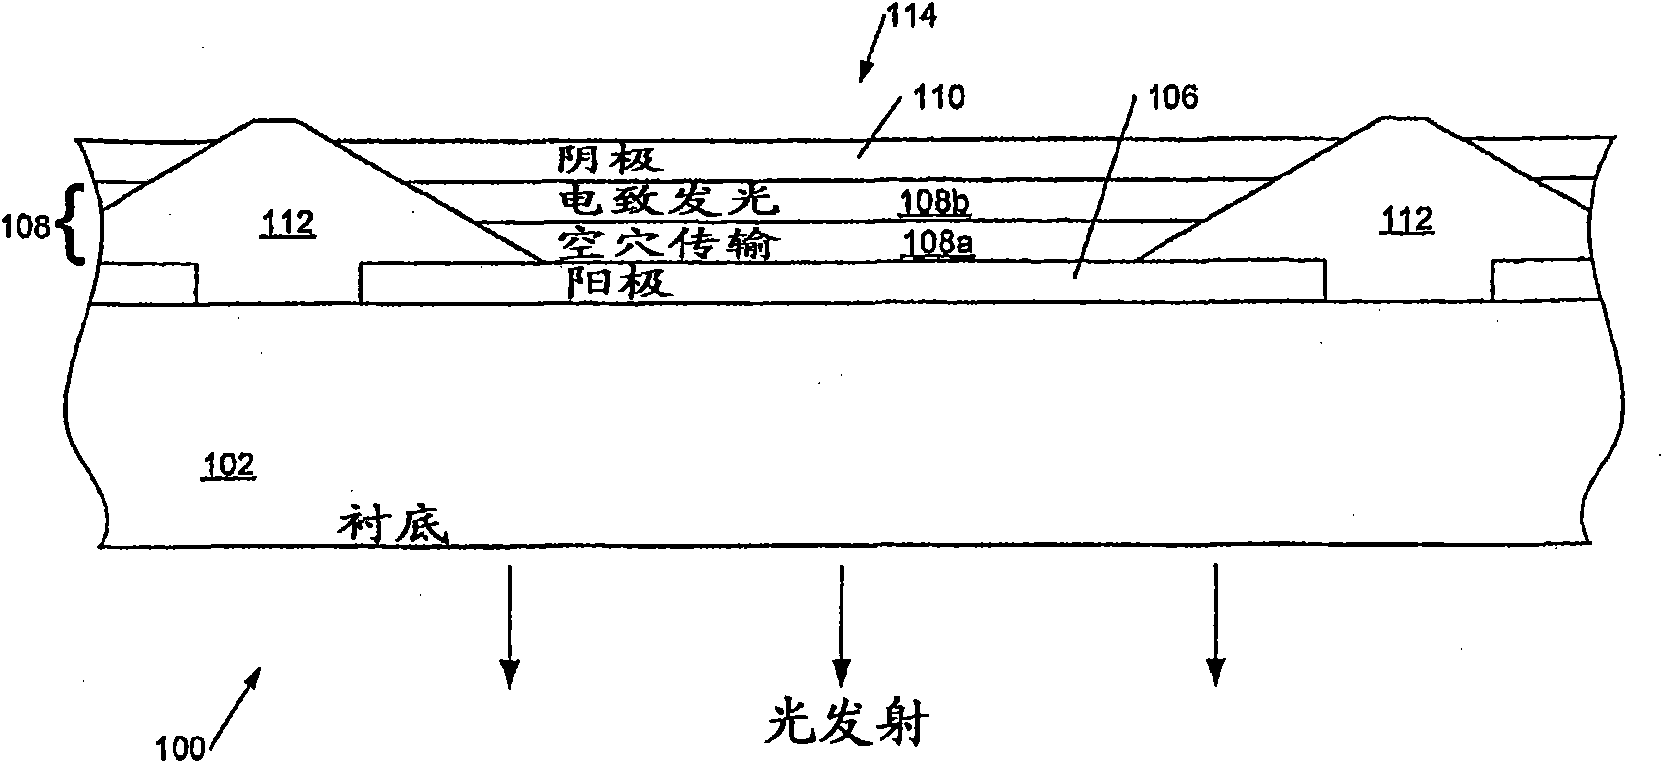 Molecular electronic device fabrication methods and structures